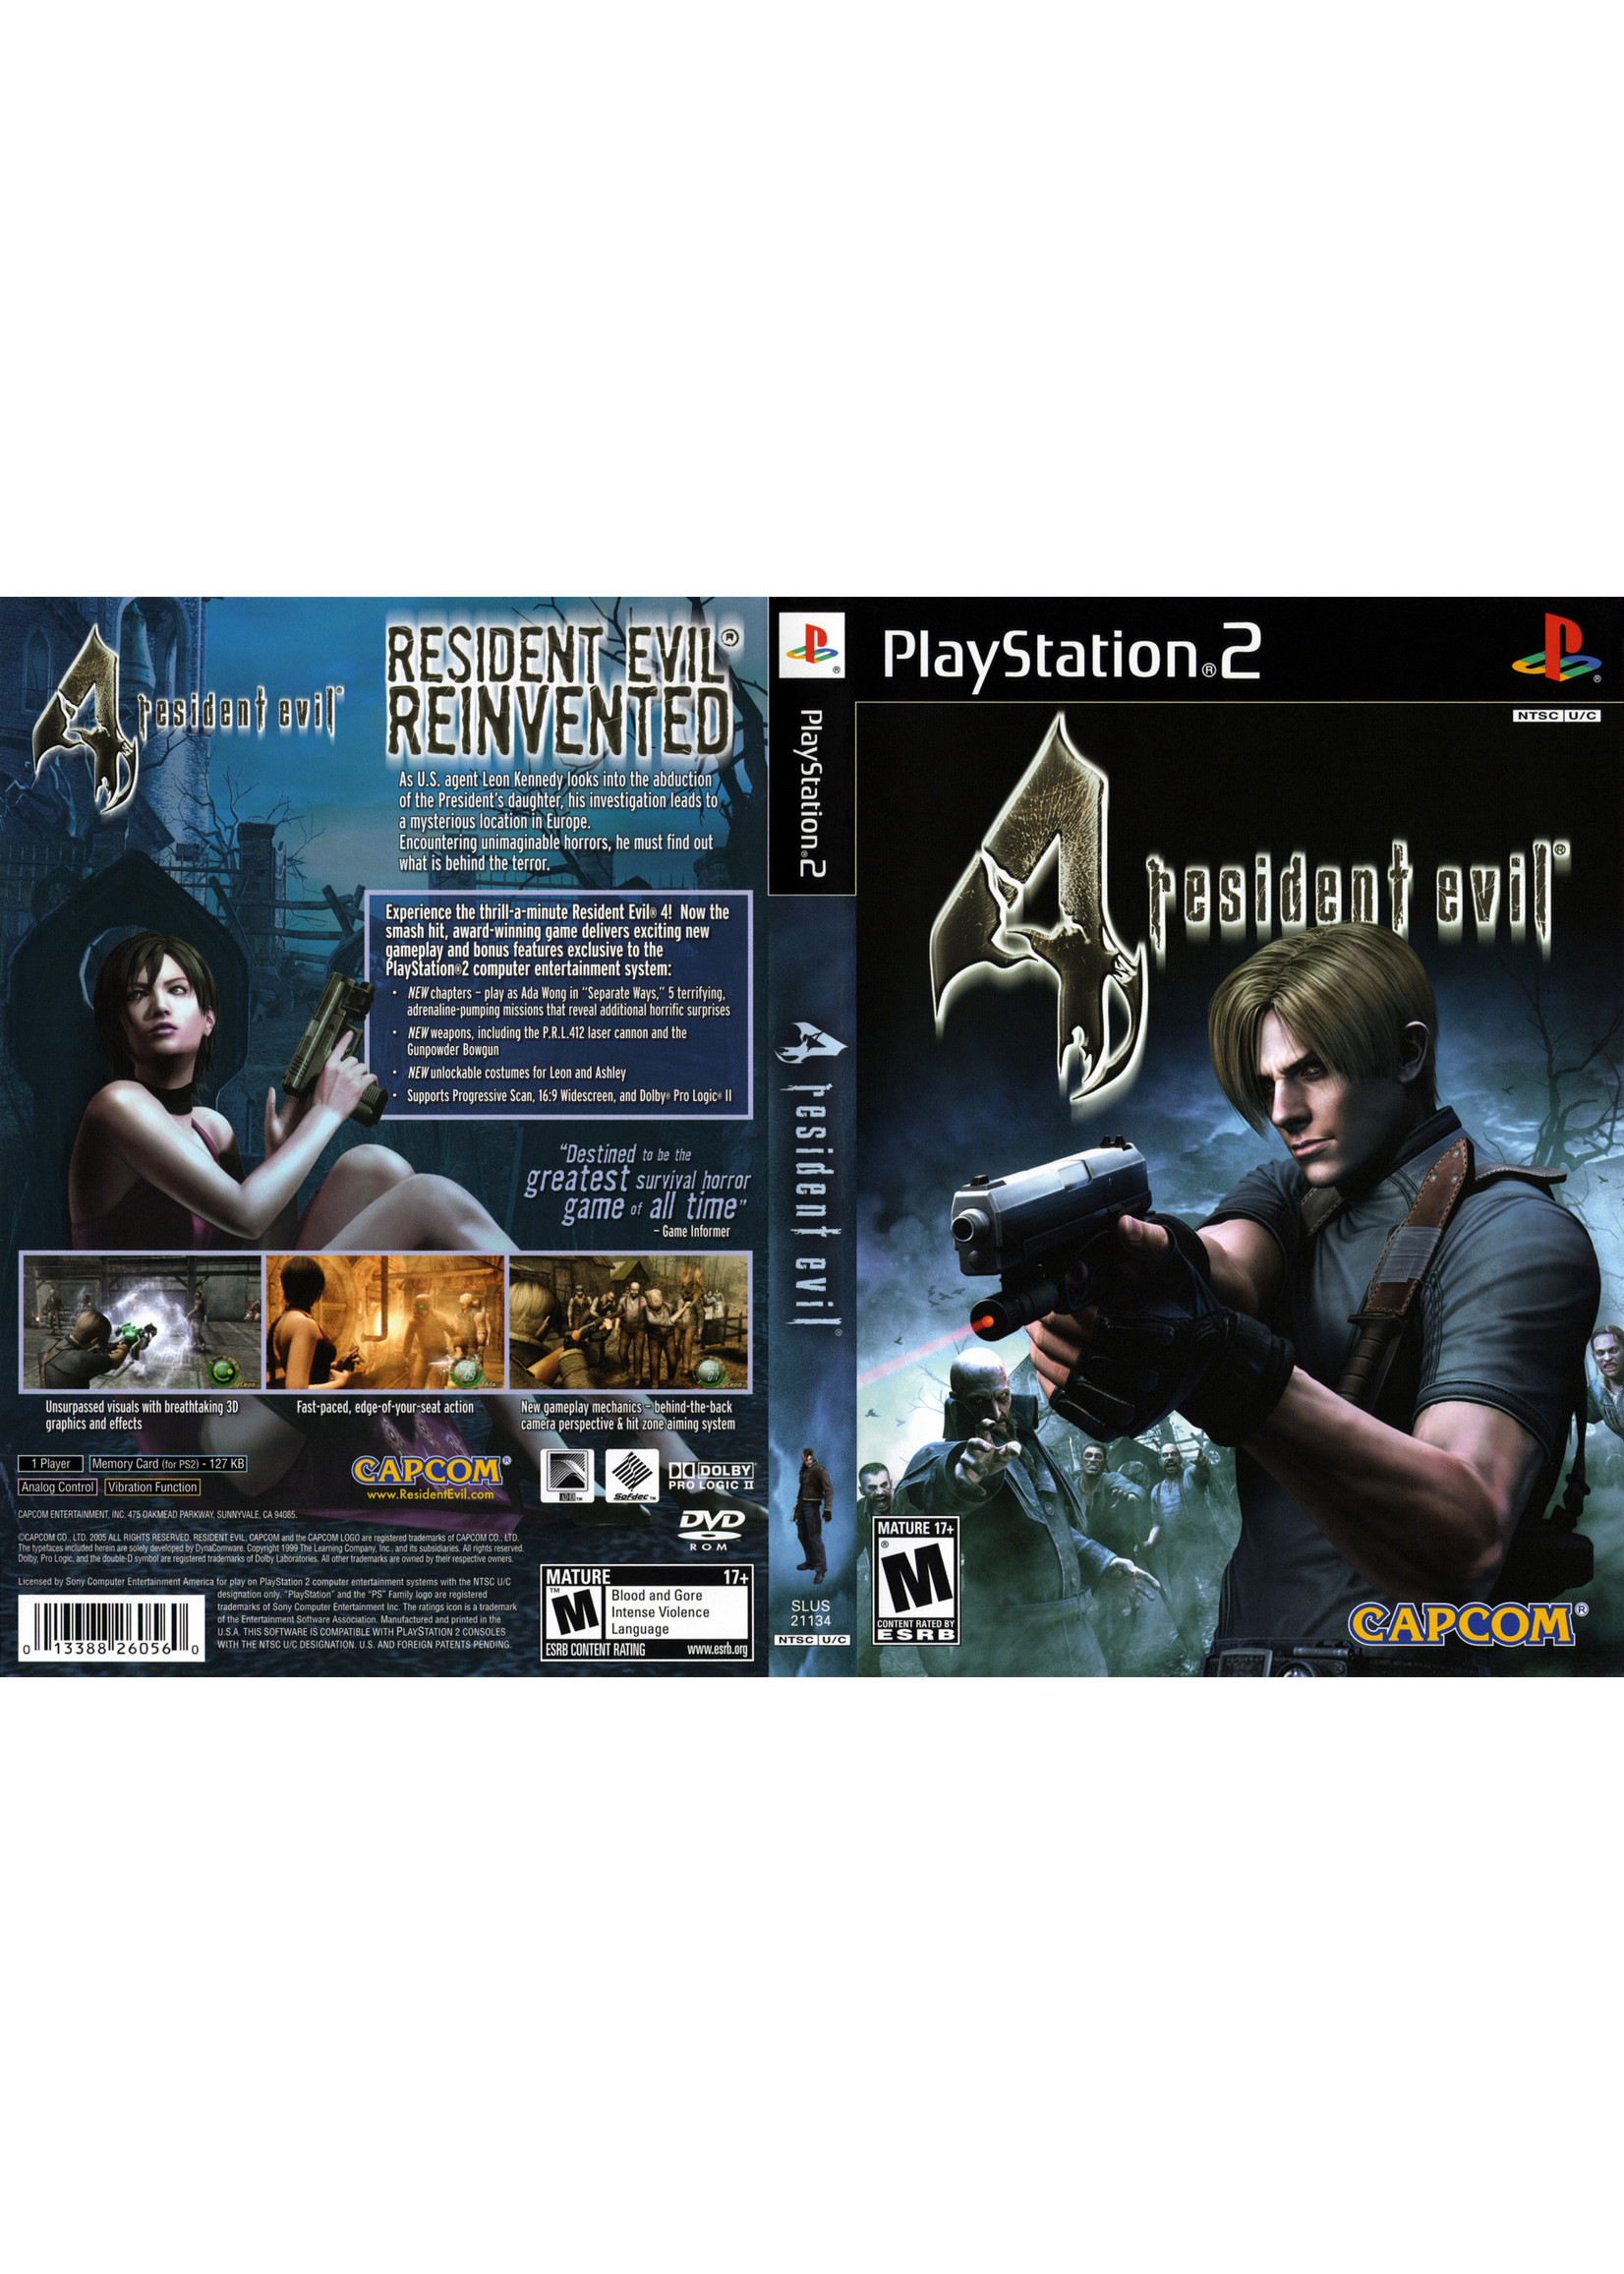 Sony Playstation 2 (PS2) Resident Evil 4